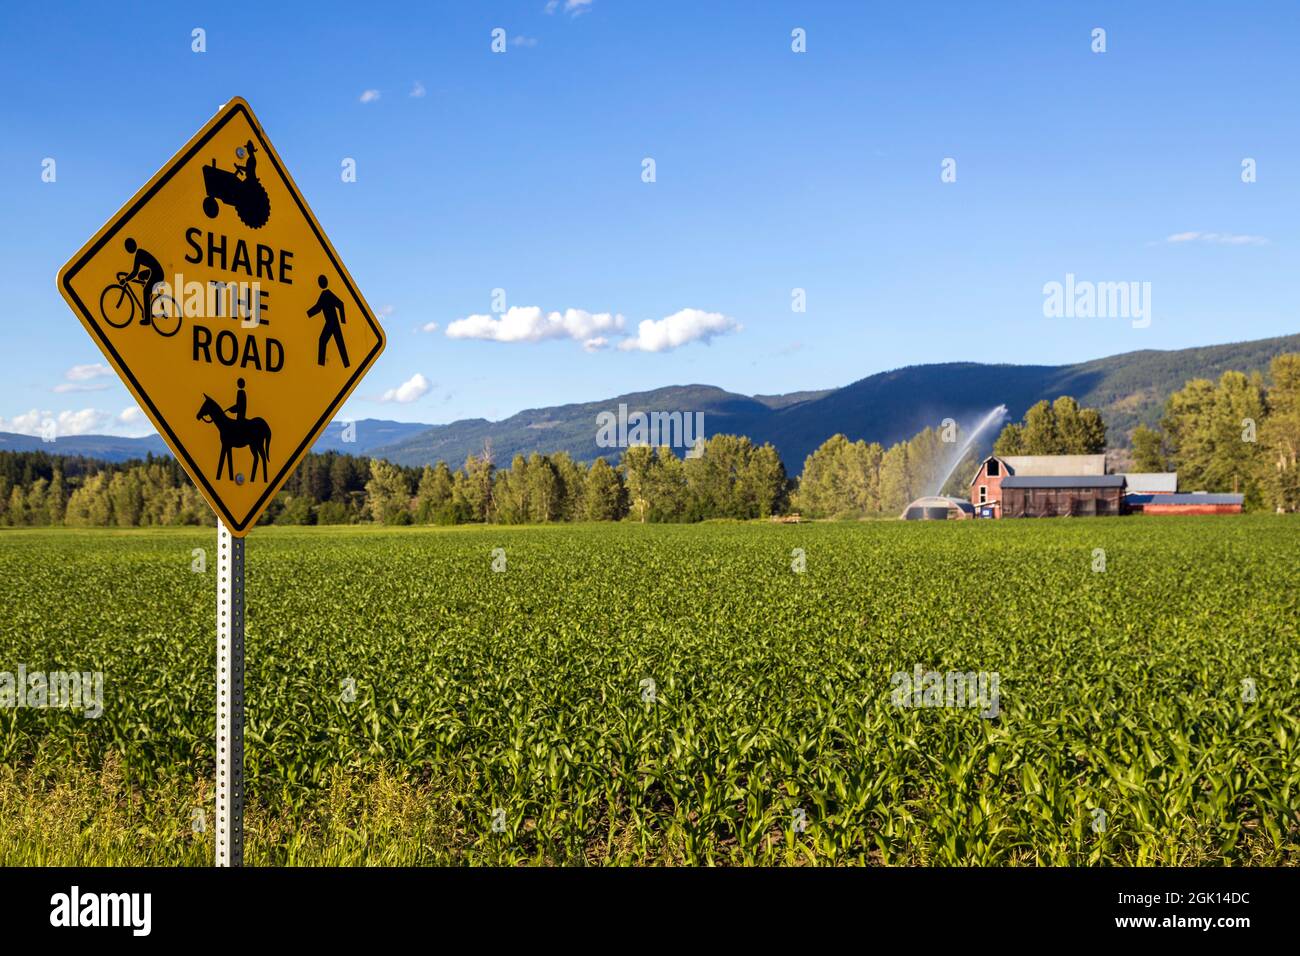 A share the road sign in Armstrong, British Columbia, Canada with pedestrian, cyclist, equestrian, and tractor farm vehicles. Stock Photo